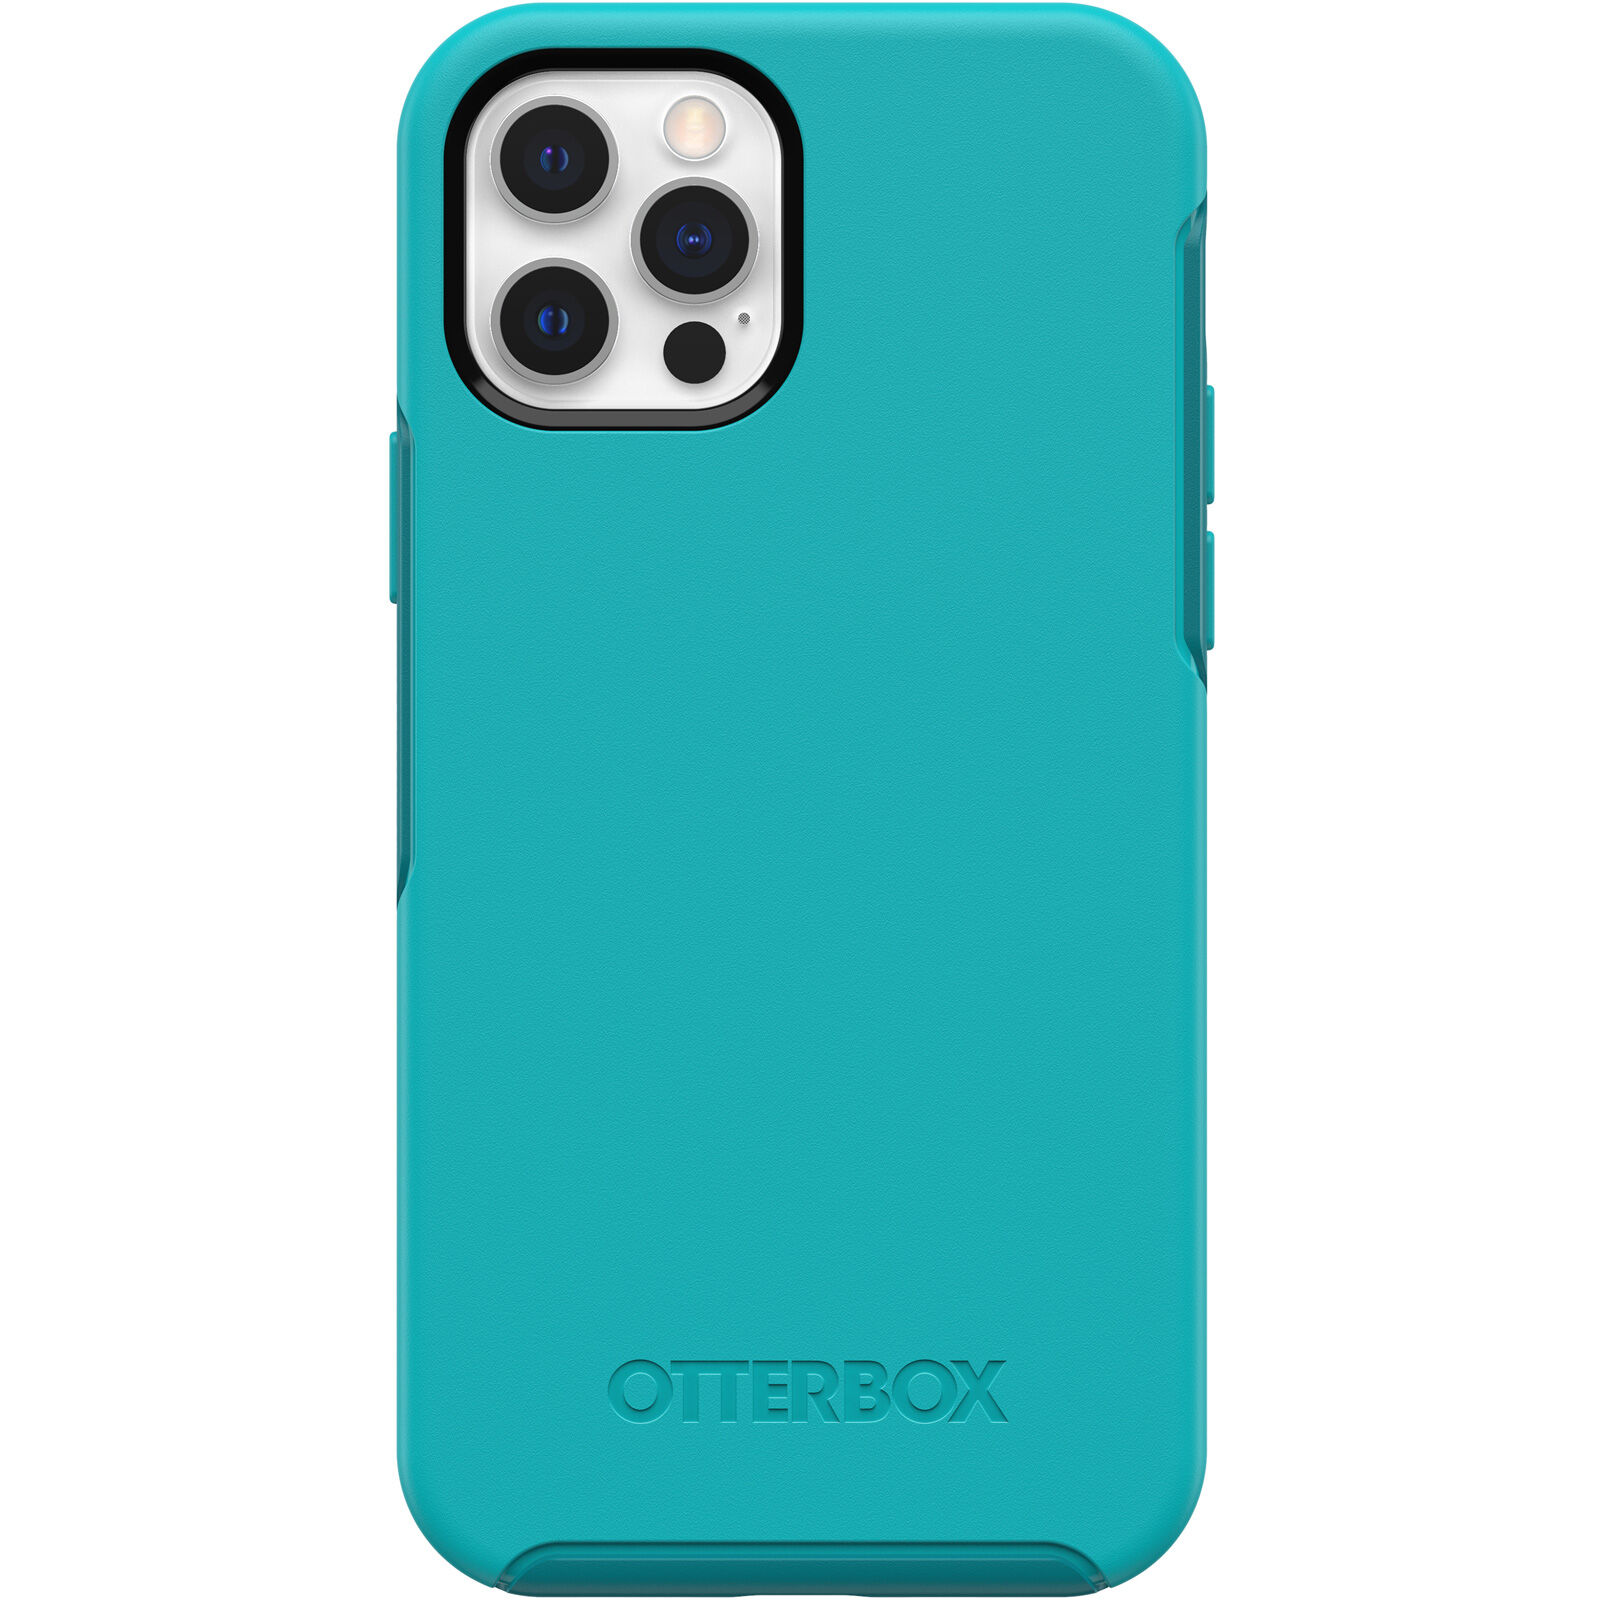 iPhone 12 cases from OtterBox